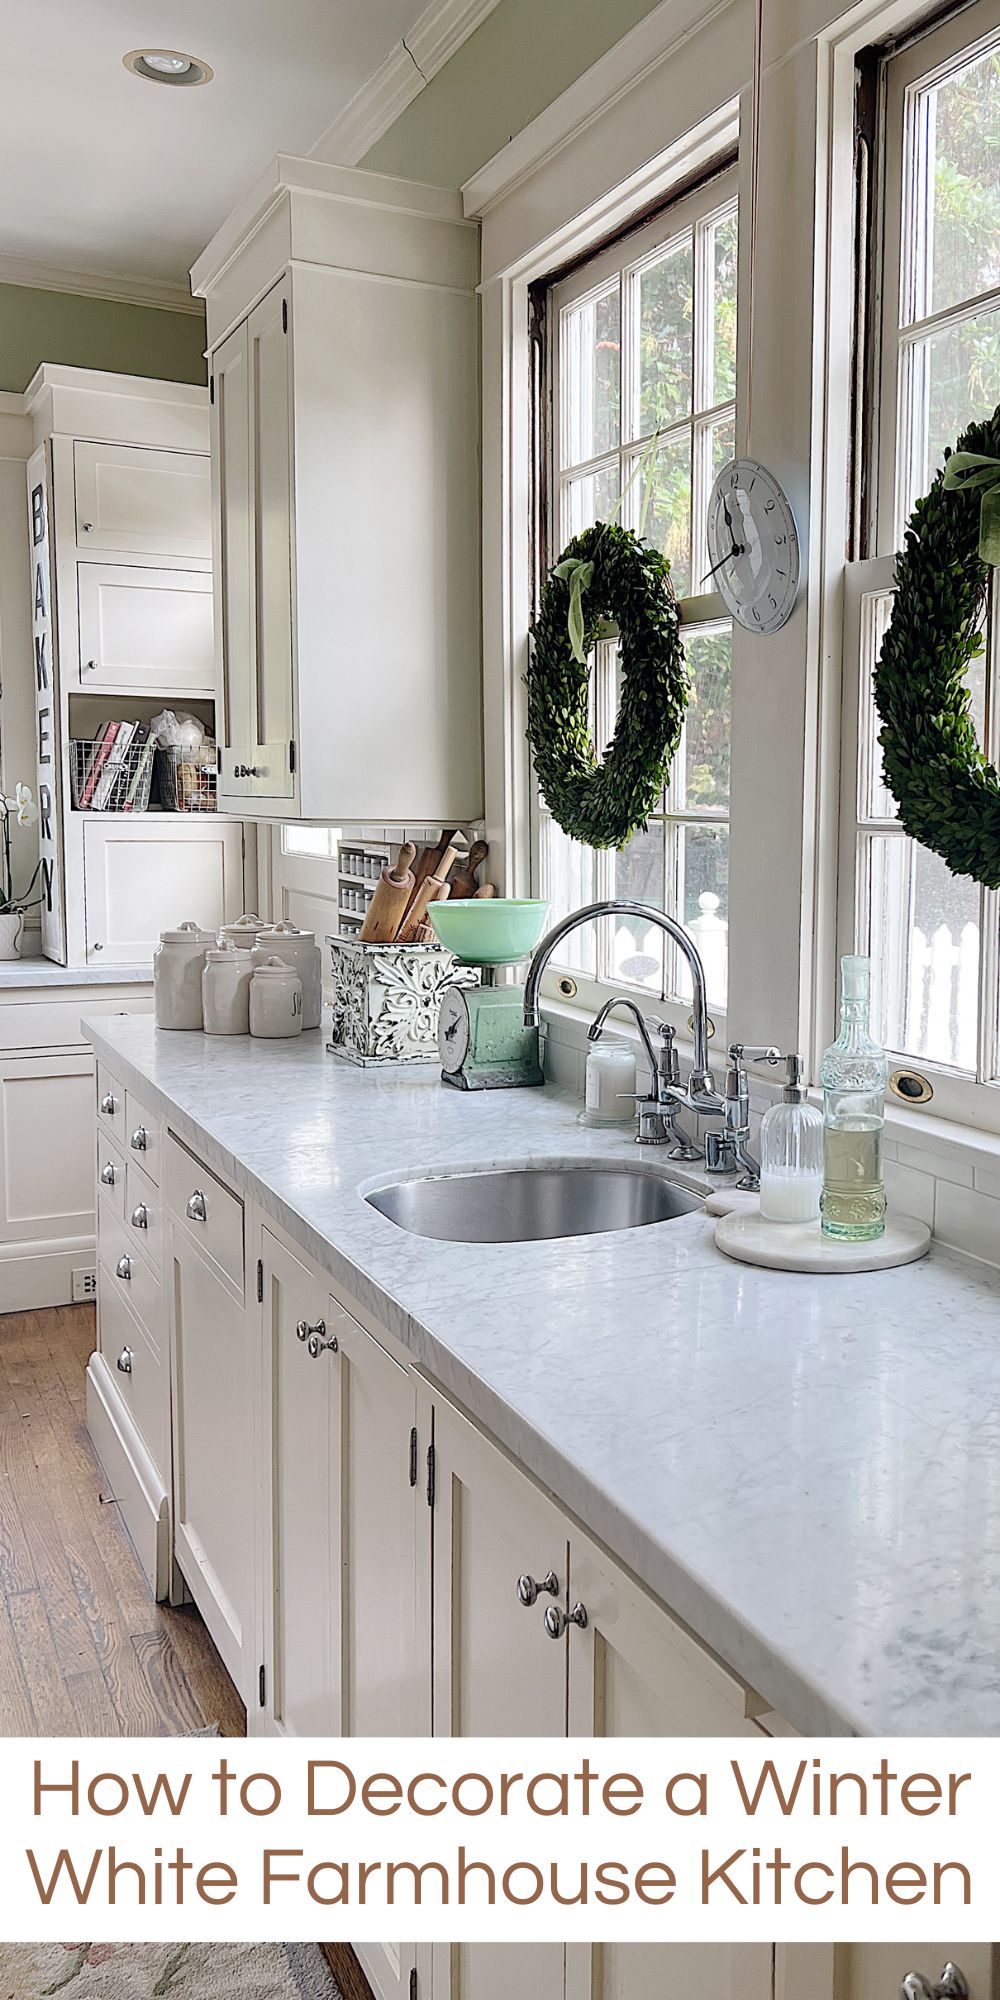 Our kitchen looked so bare when I took down the holiday decor. So I grabbed some wreaths and love my new winter white farmhouse kitchen.